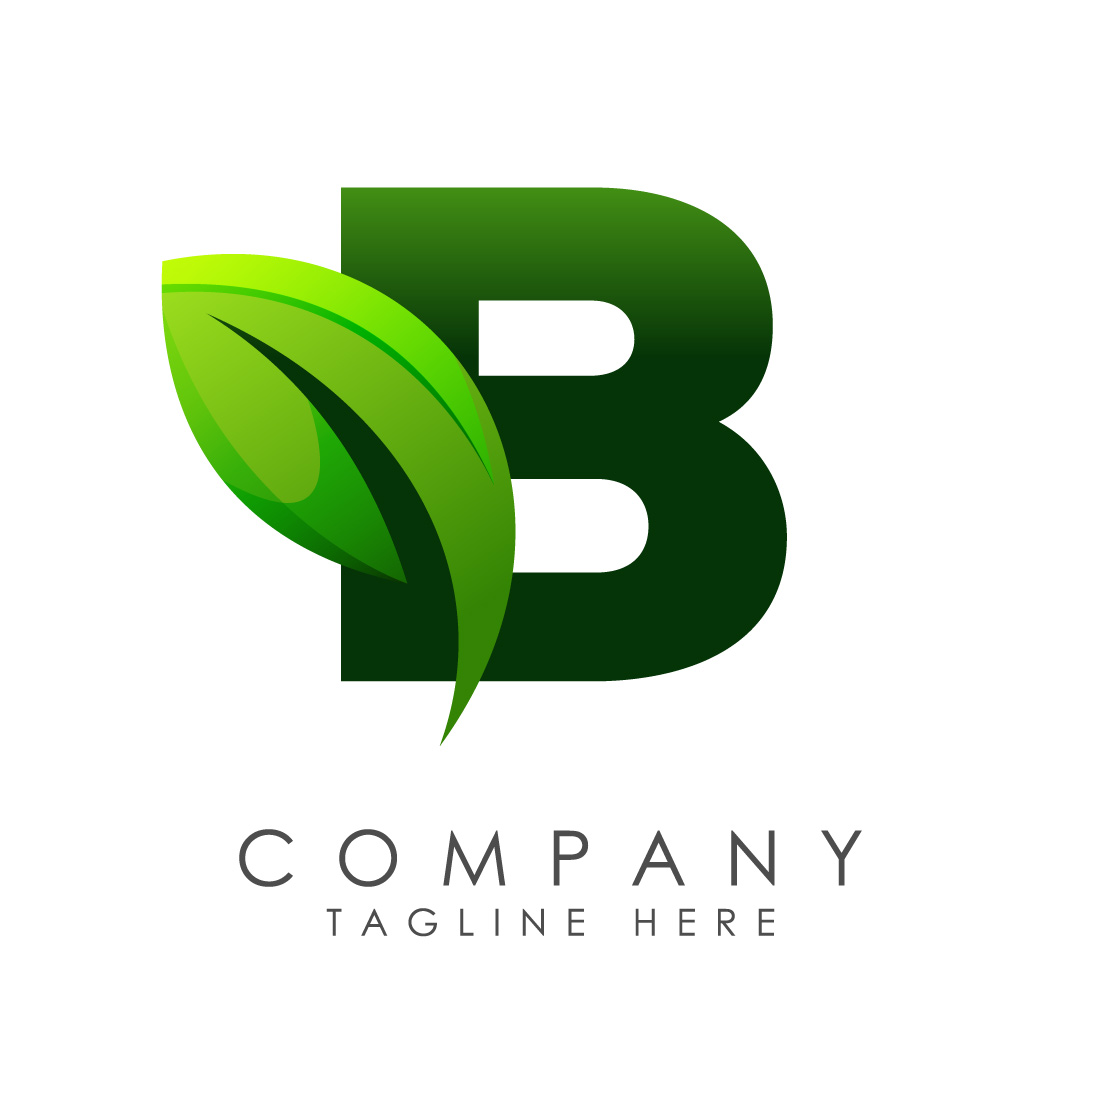 Initial B alphabet with a leaf Eco-friendly logo concept Graphic alphabet symbol for business and company identity cover image.